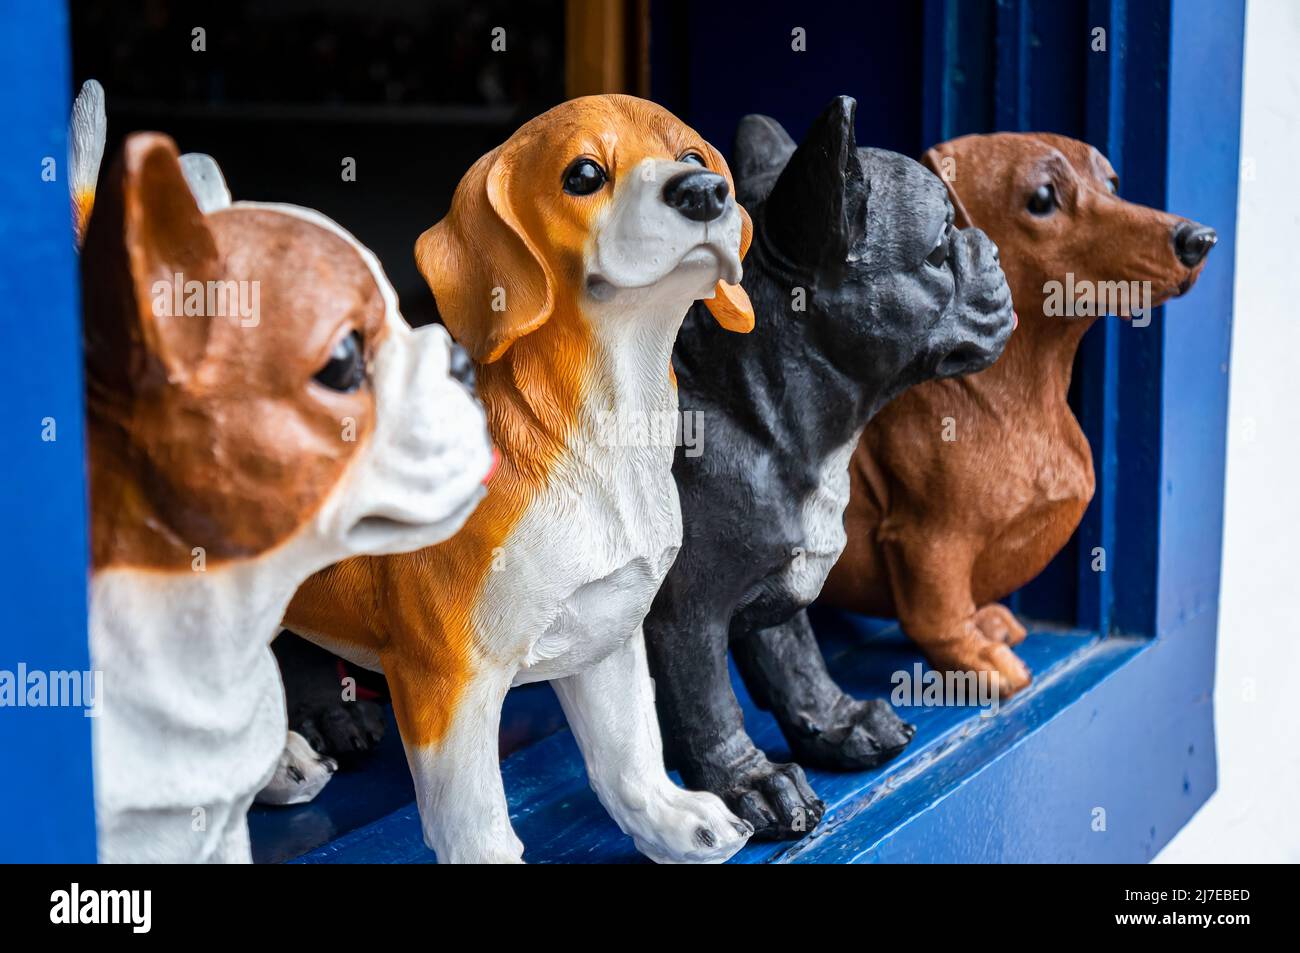 Some dog breeds for garden ornaments displayed at the window of Mar Belle handmade craft store at Inconfidentes street, nearby historical center. Stock Photo